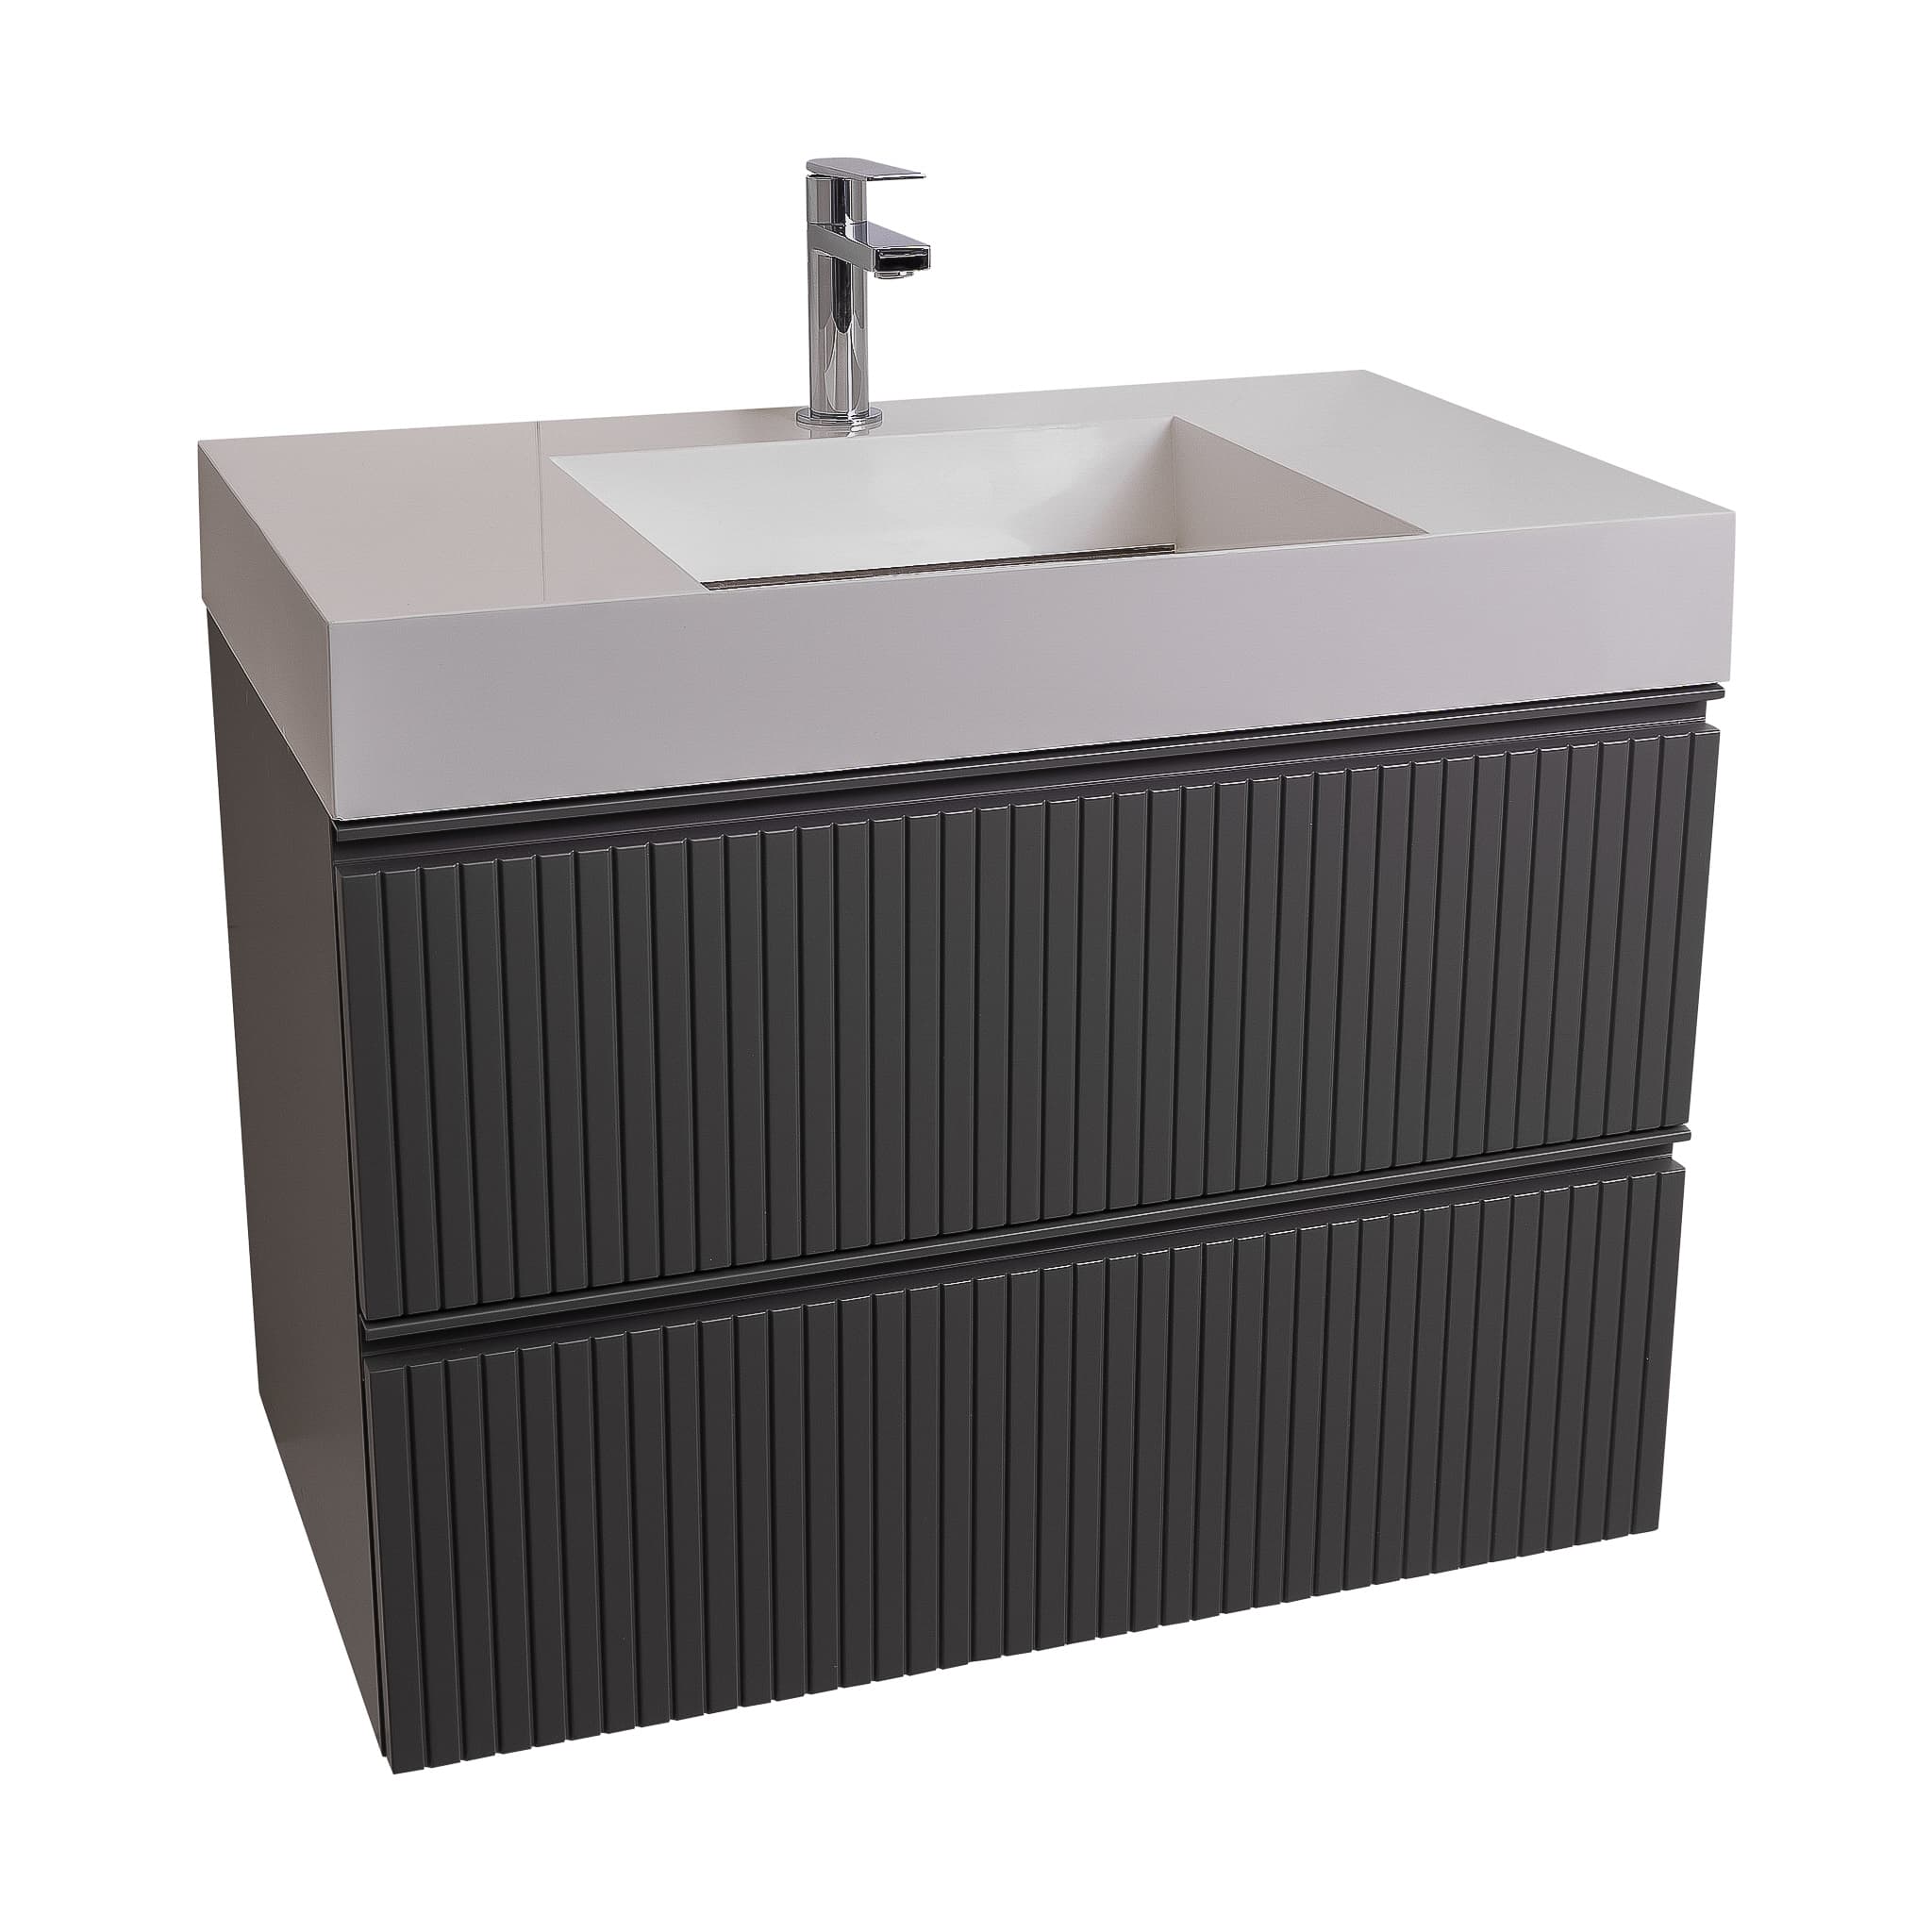 Ares 31.5 Matte Grey Cabinet, Infinity Cultured Marble Sink, Wall Mounted Modern Vanity Set